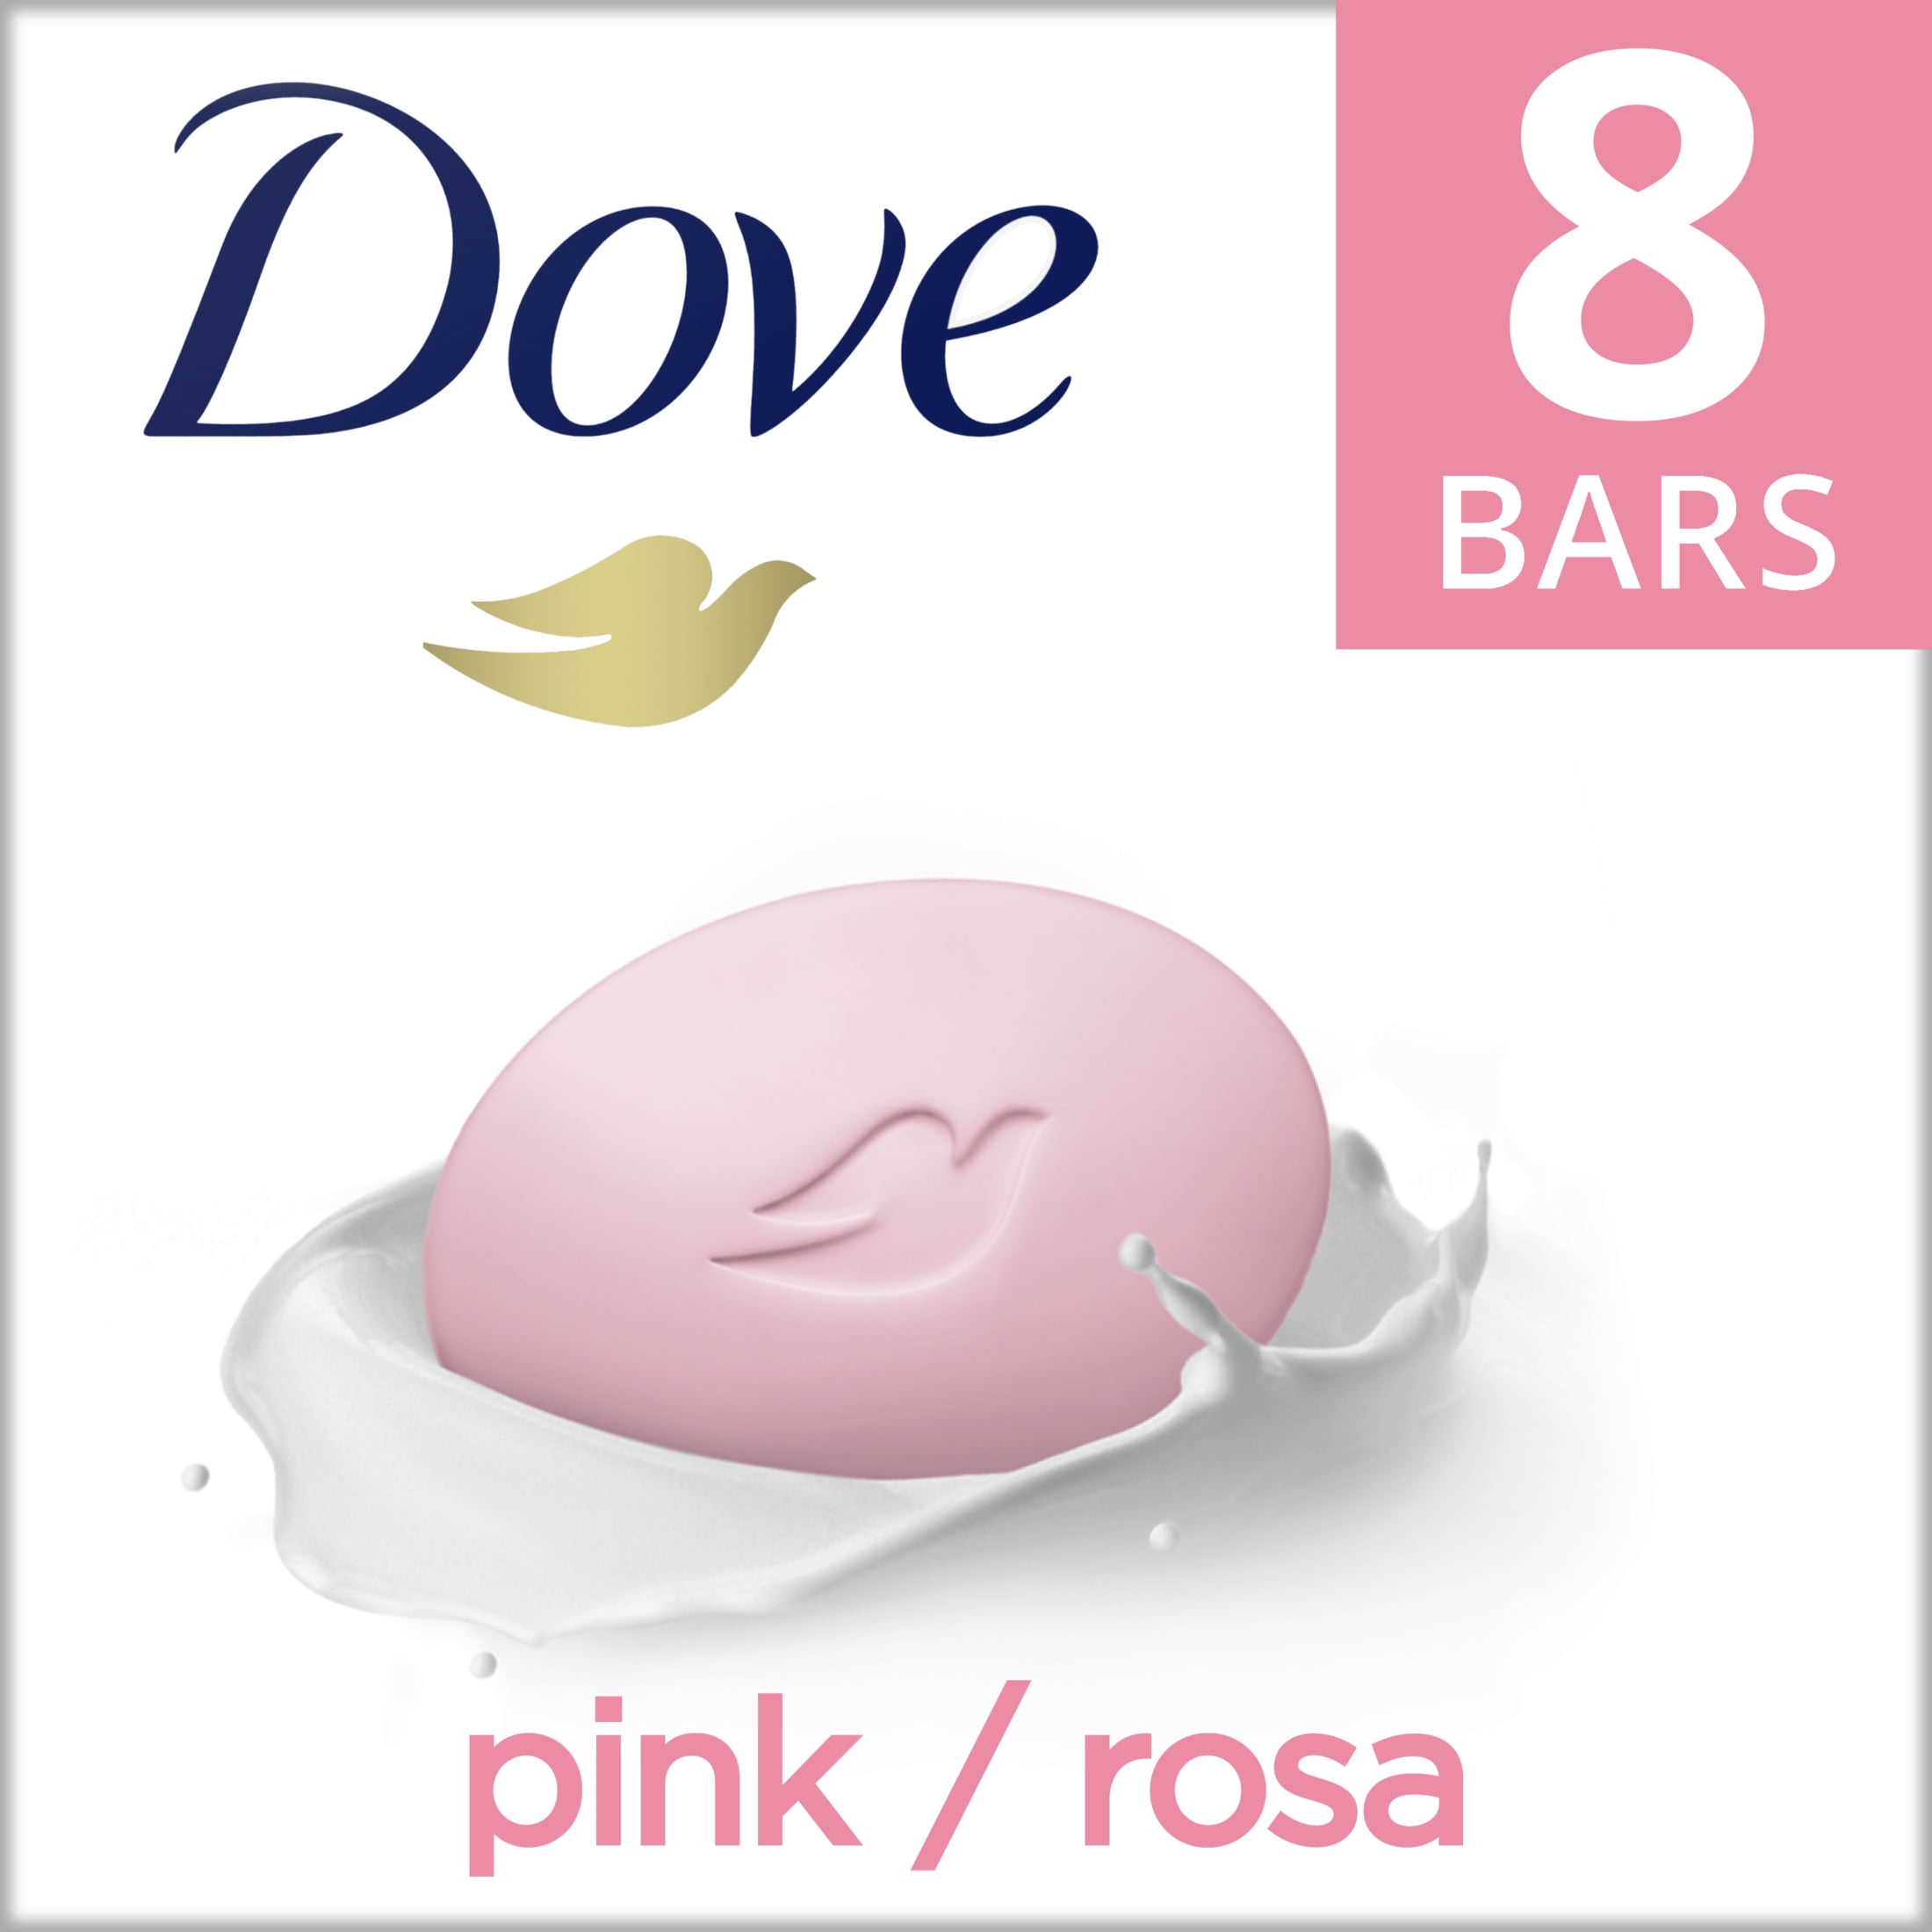 Dove Pink With Deep Moisture Beauty Bar, 3.75 Oz Count 8